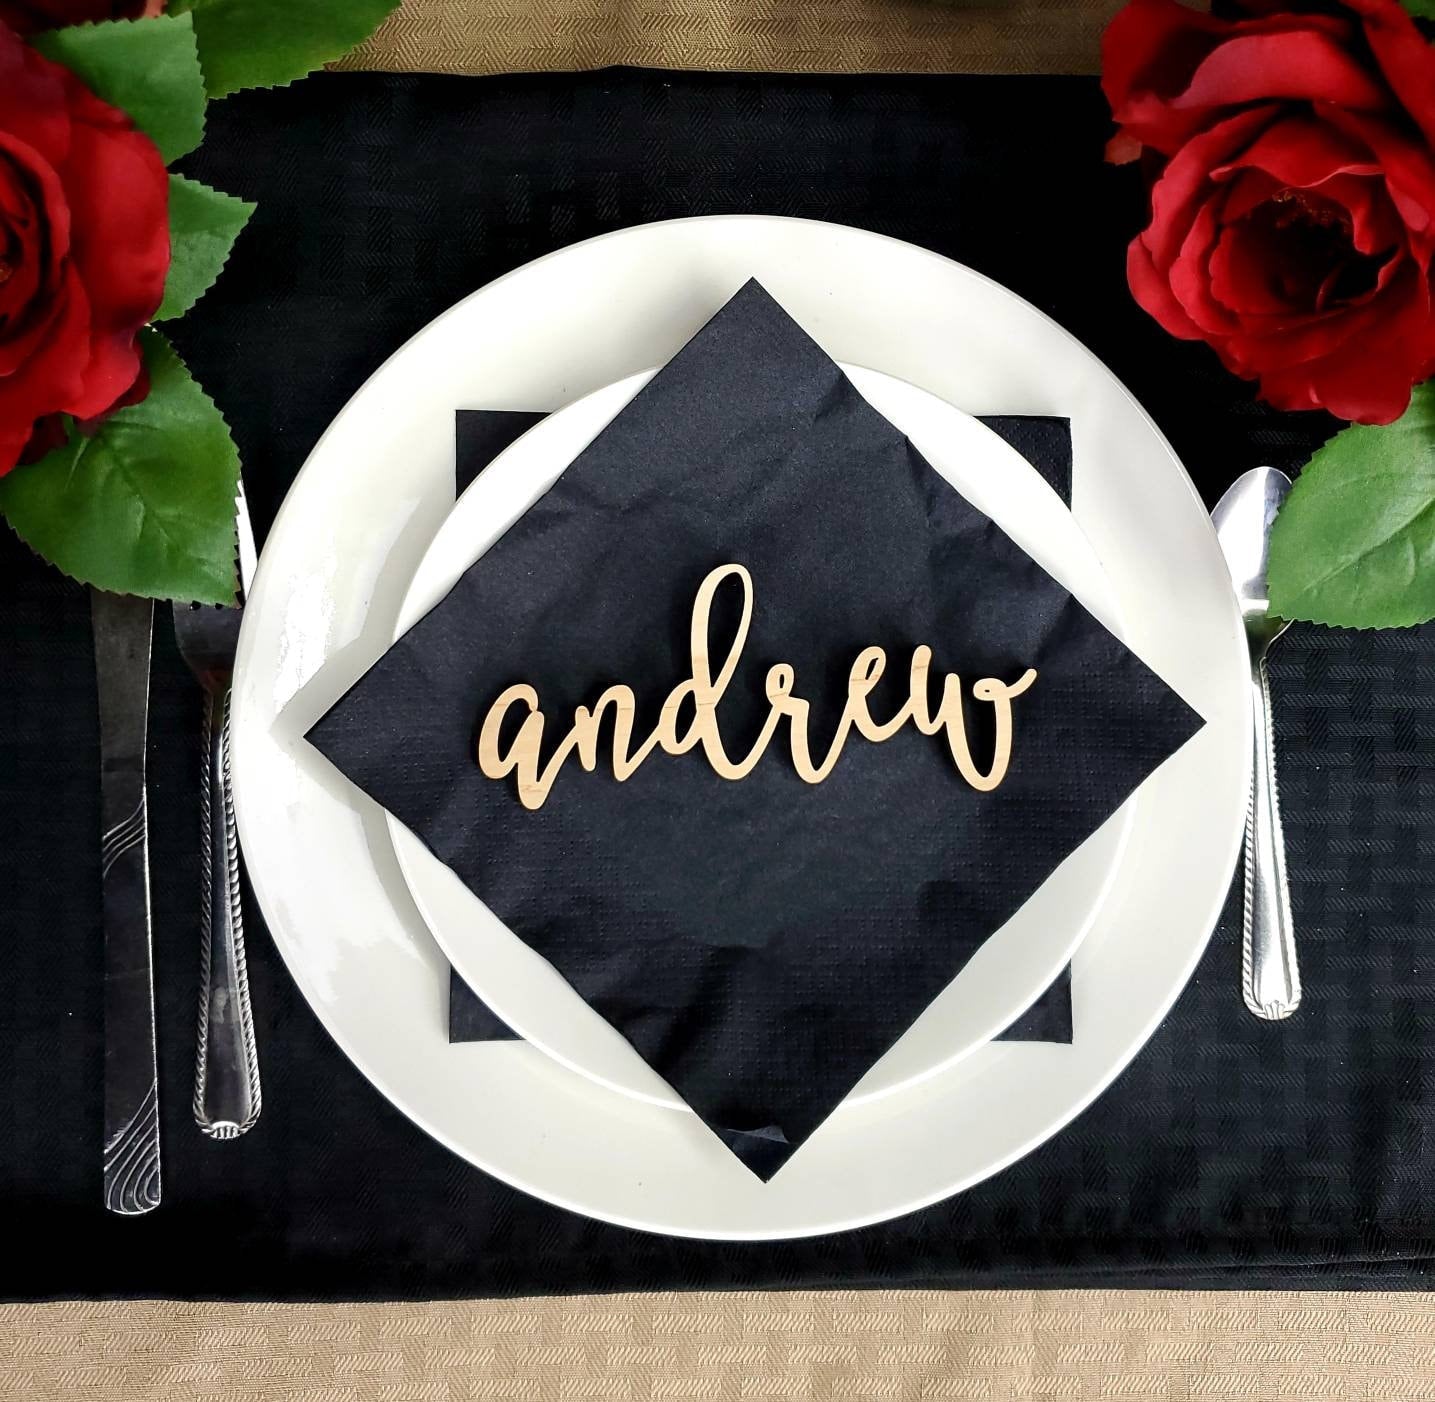 Place Cards, Table Name Cards